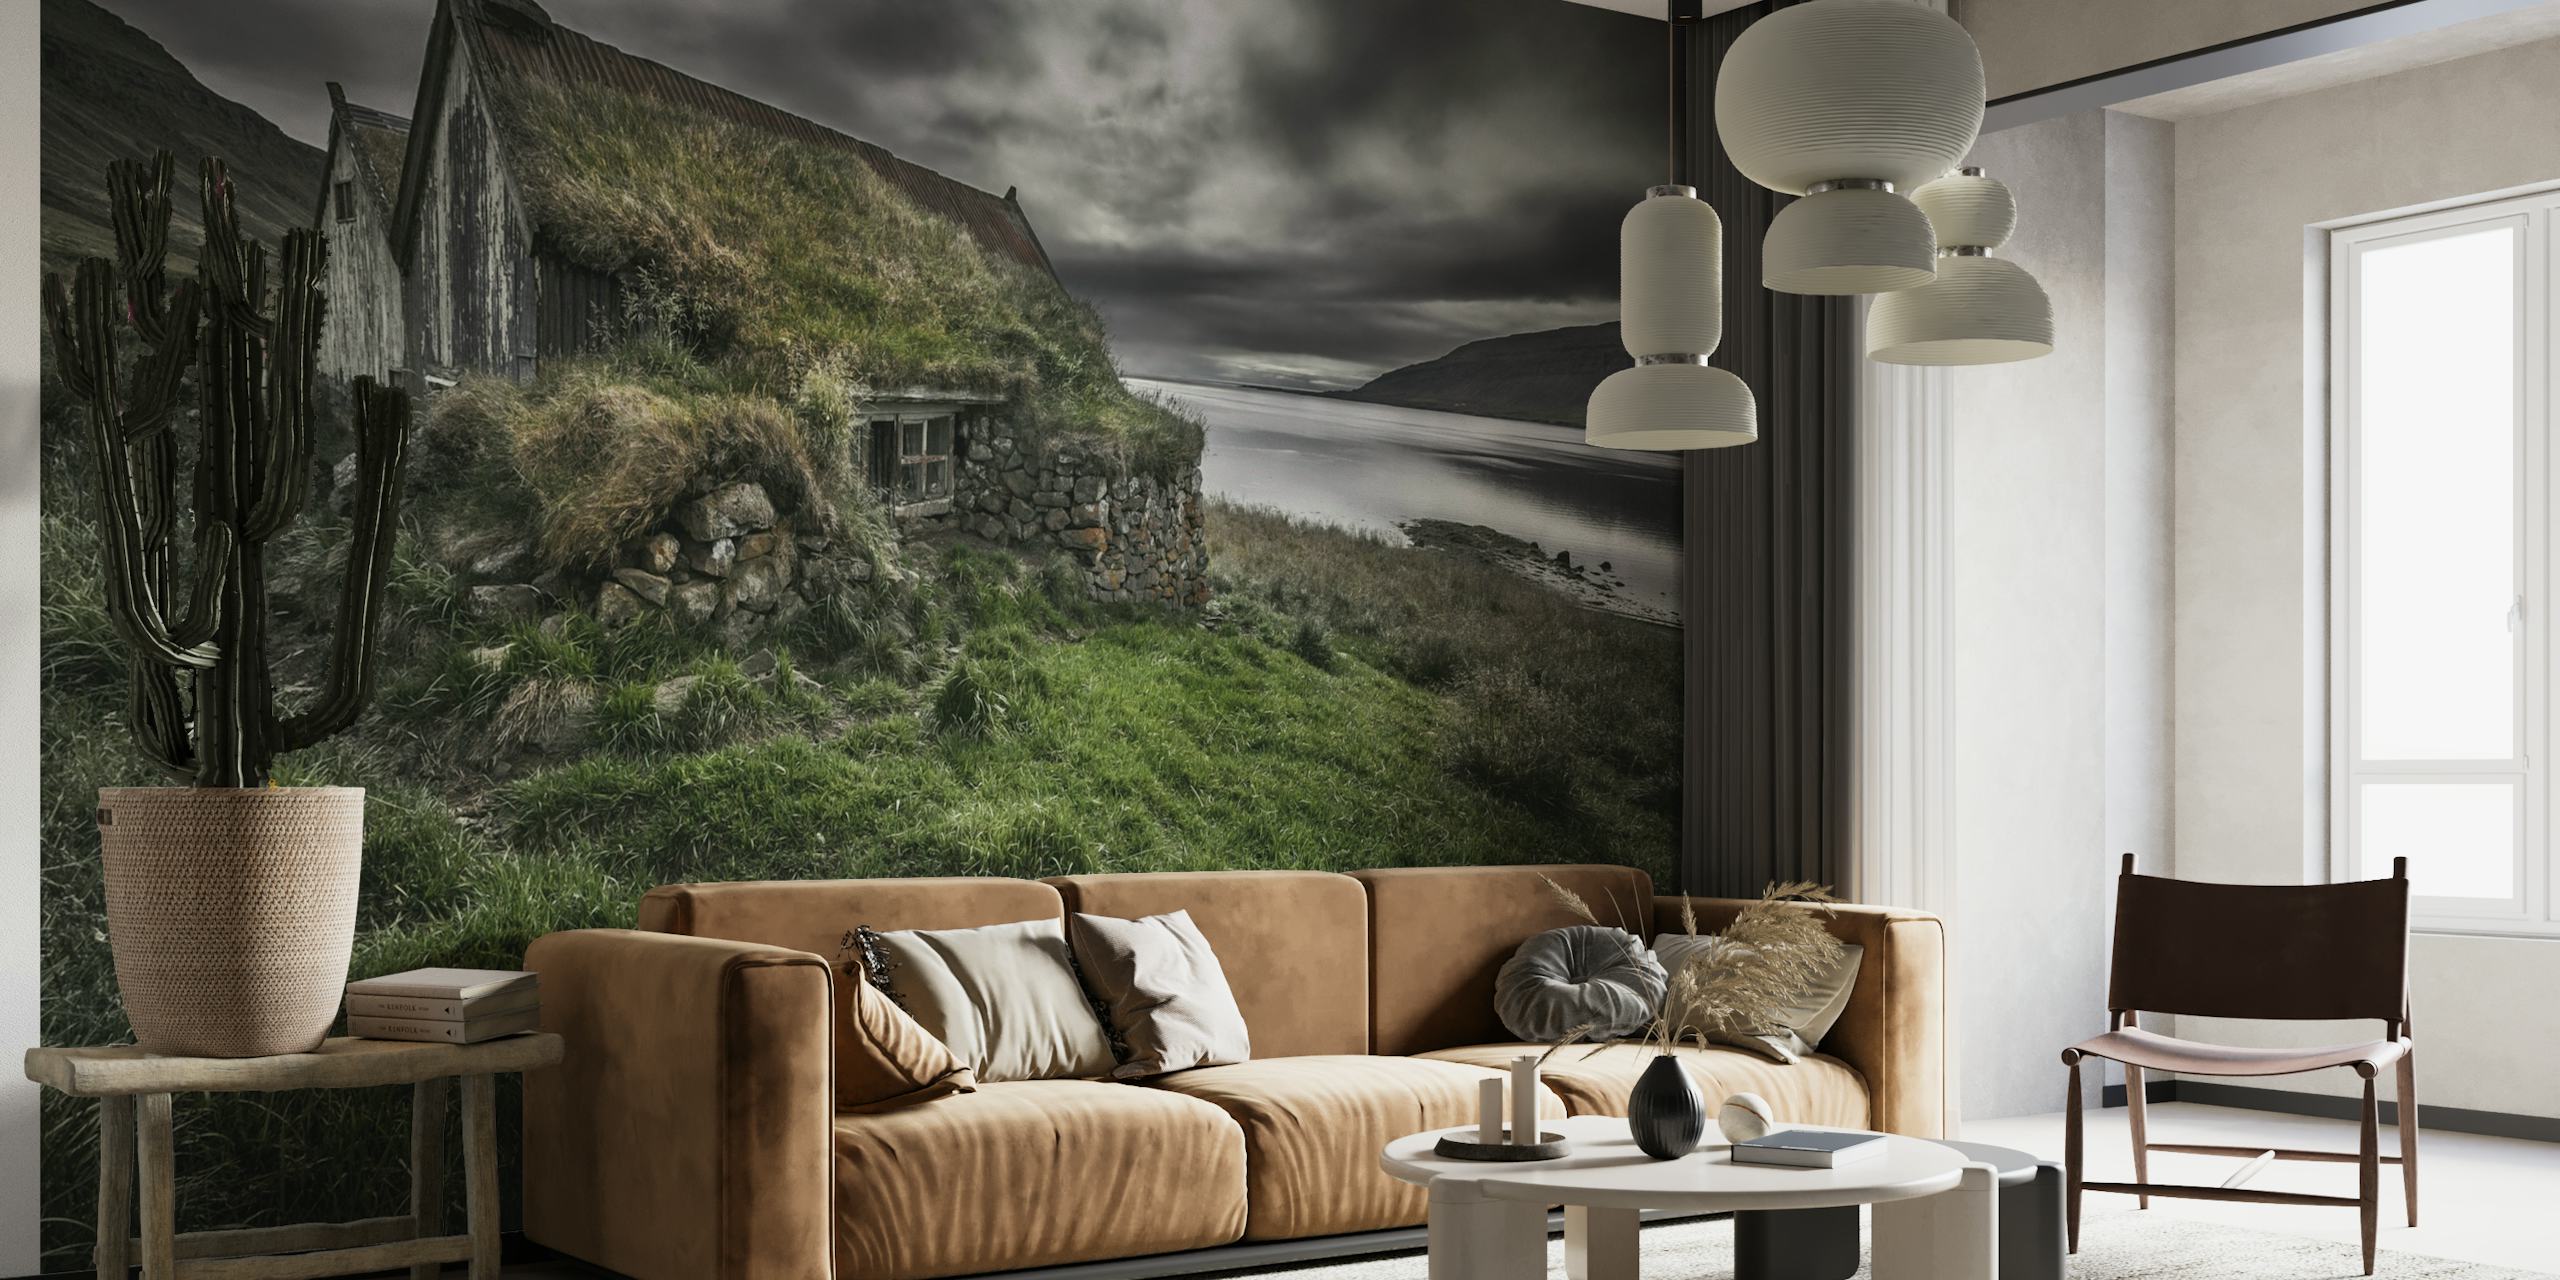 Stone cottage with grass roof in a dramatic landscape wall mural